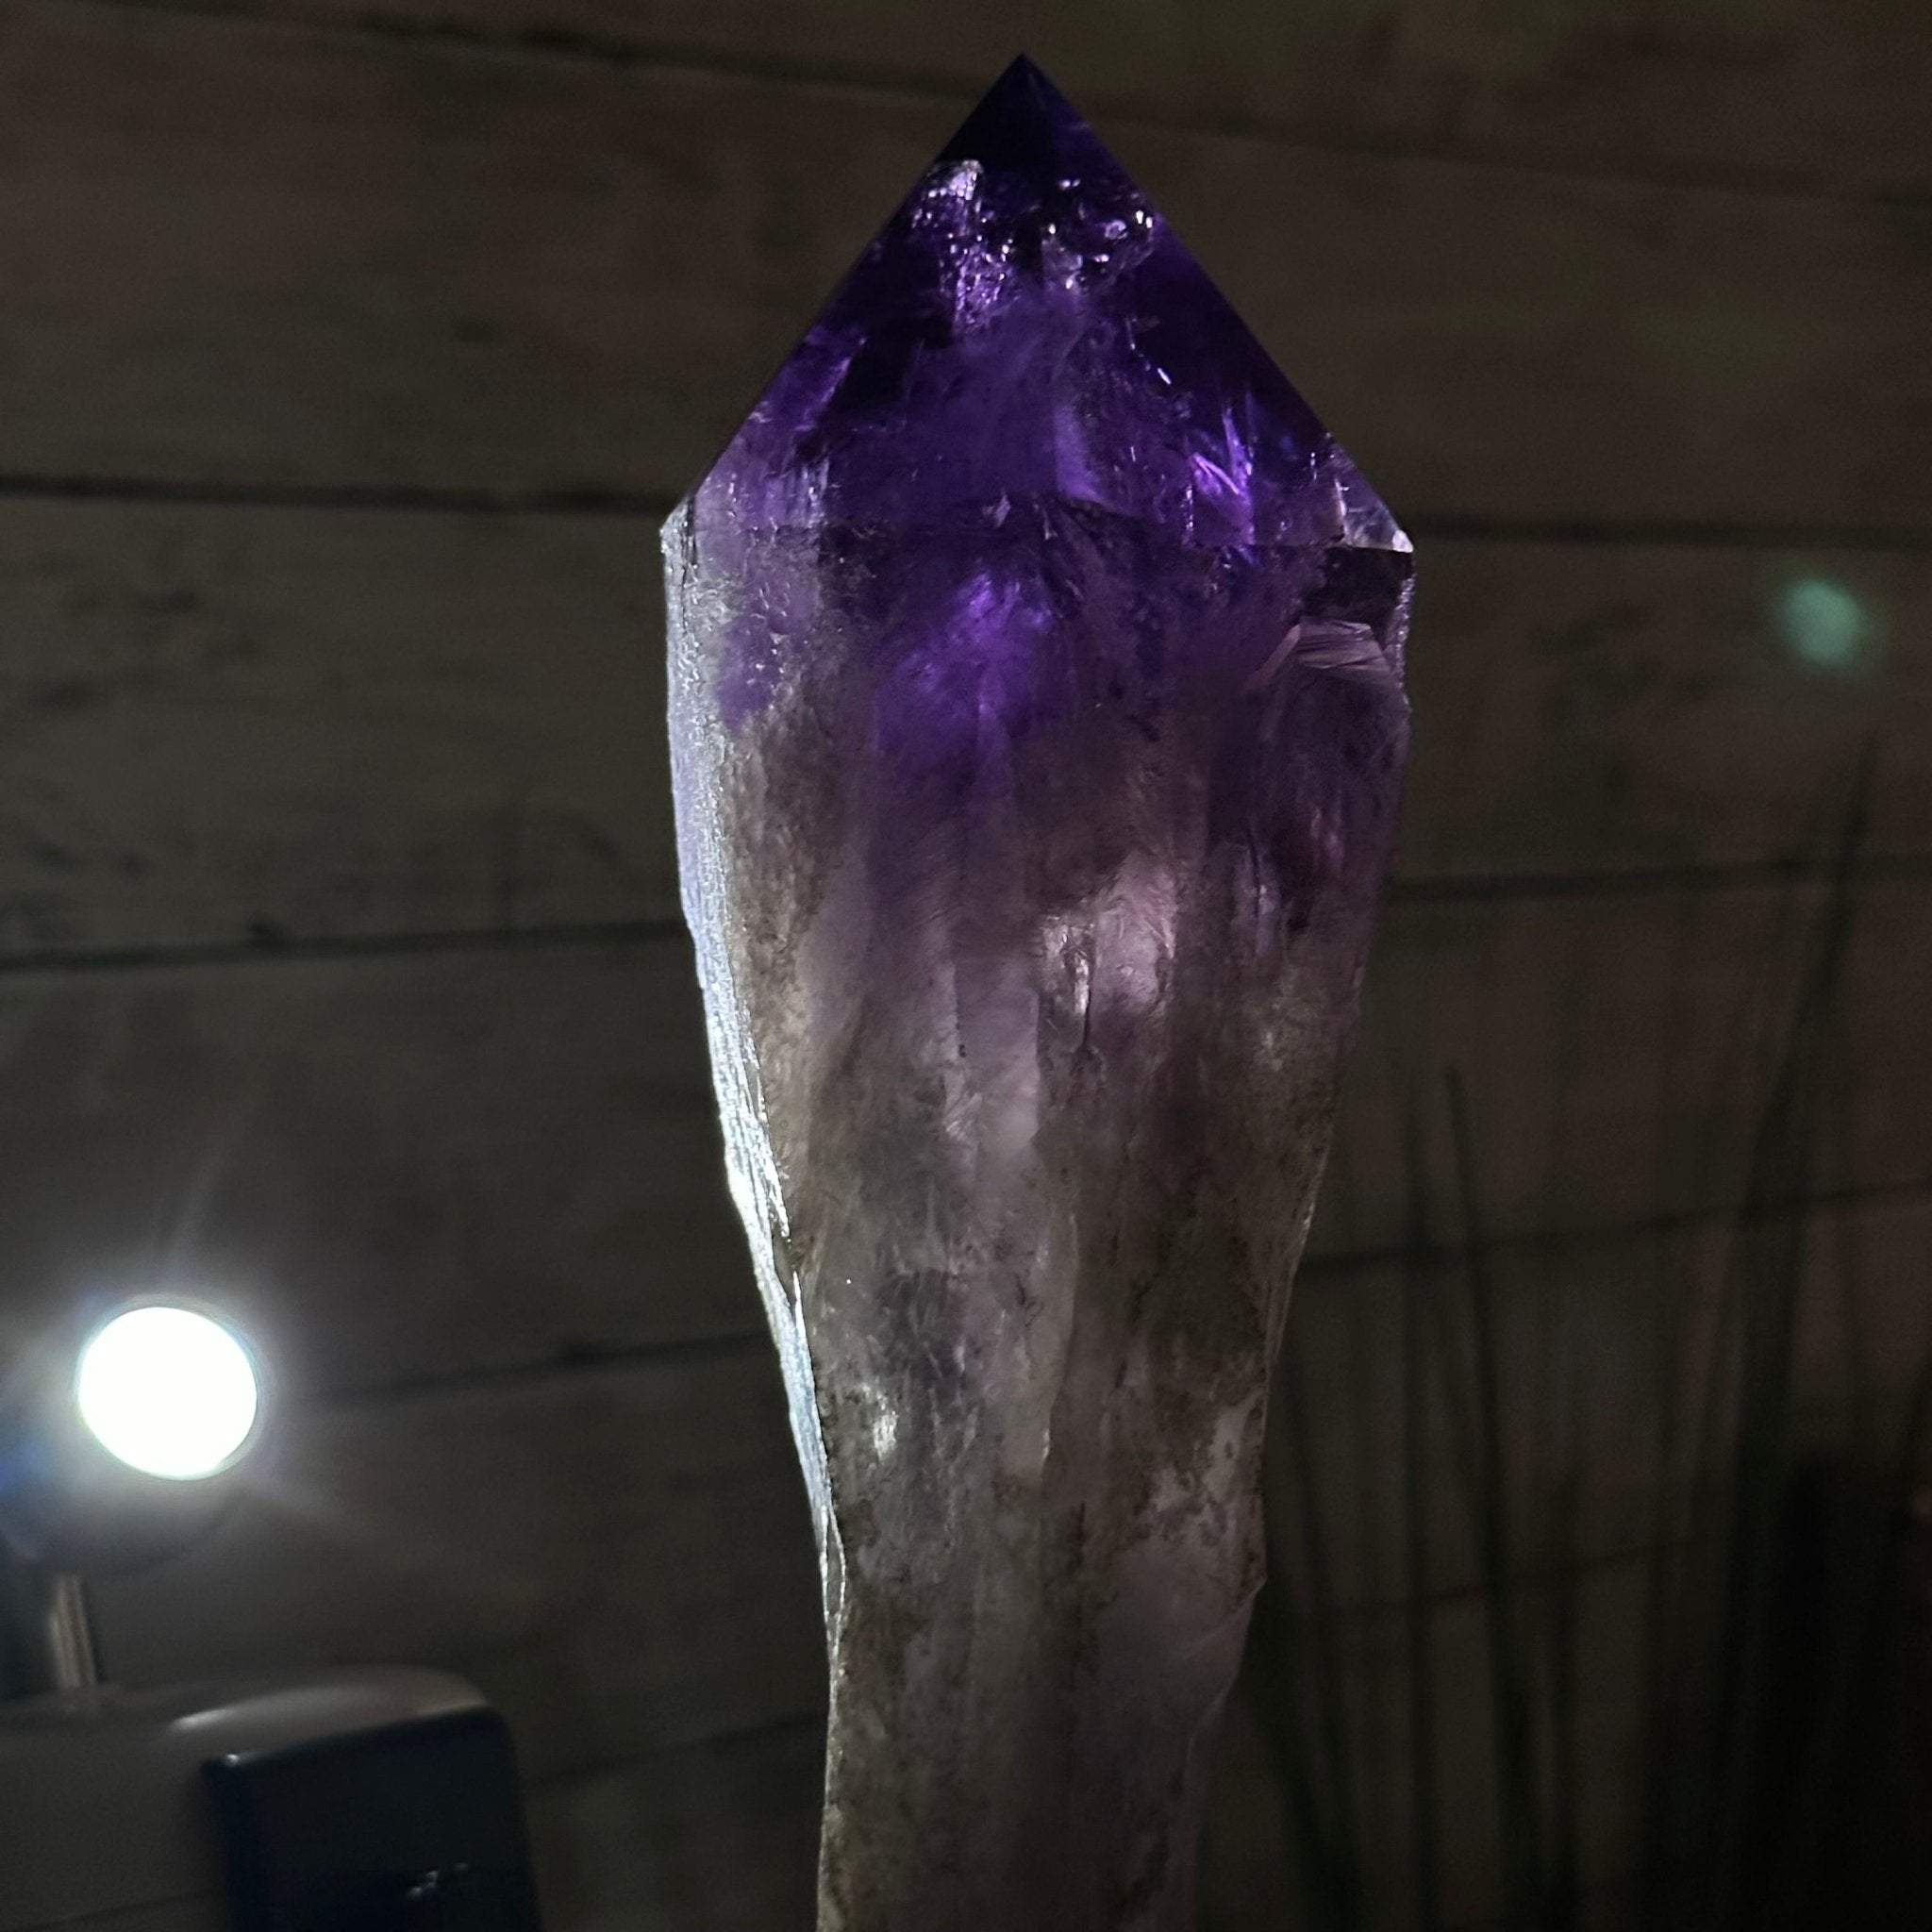 Super Quality Amethyst Wand on a Metal Stand, 2.9 lbs & 15.2" Tall #3123AM-015 - Brazil GemsBrazil GemsSuper Quality Amethyst Wand on a Metal Stand, 2.9 lbs & 15.2" Tall #3123AM-015Clusters on Fixed Bases3123AM-015